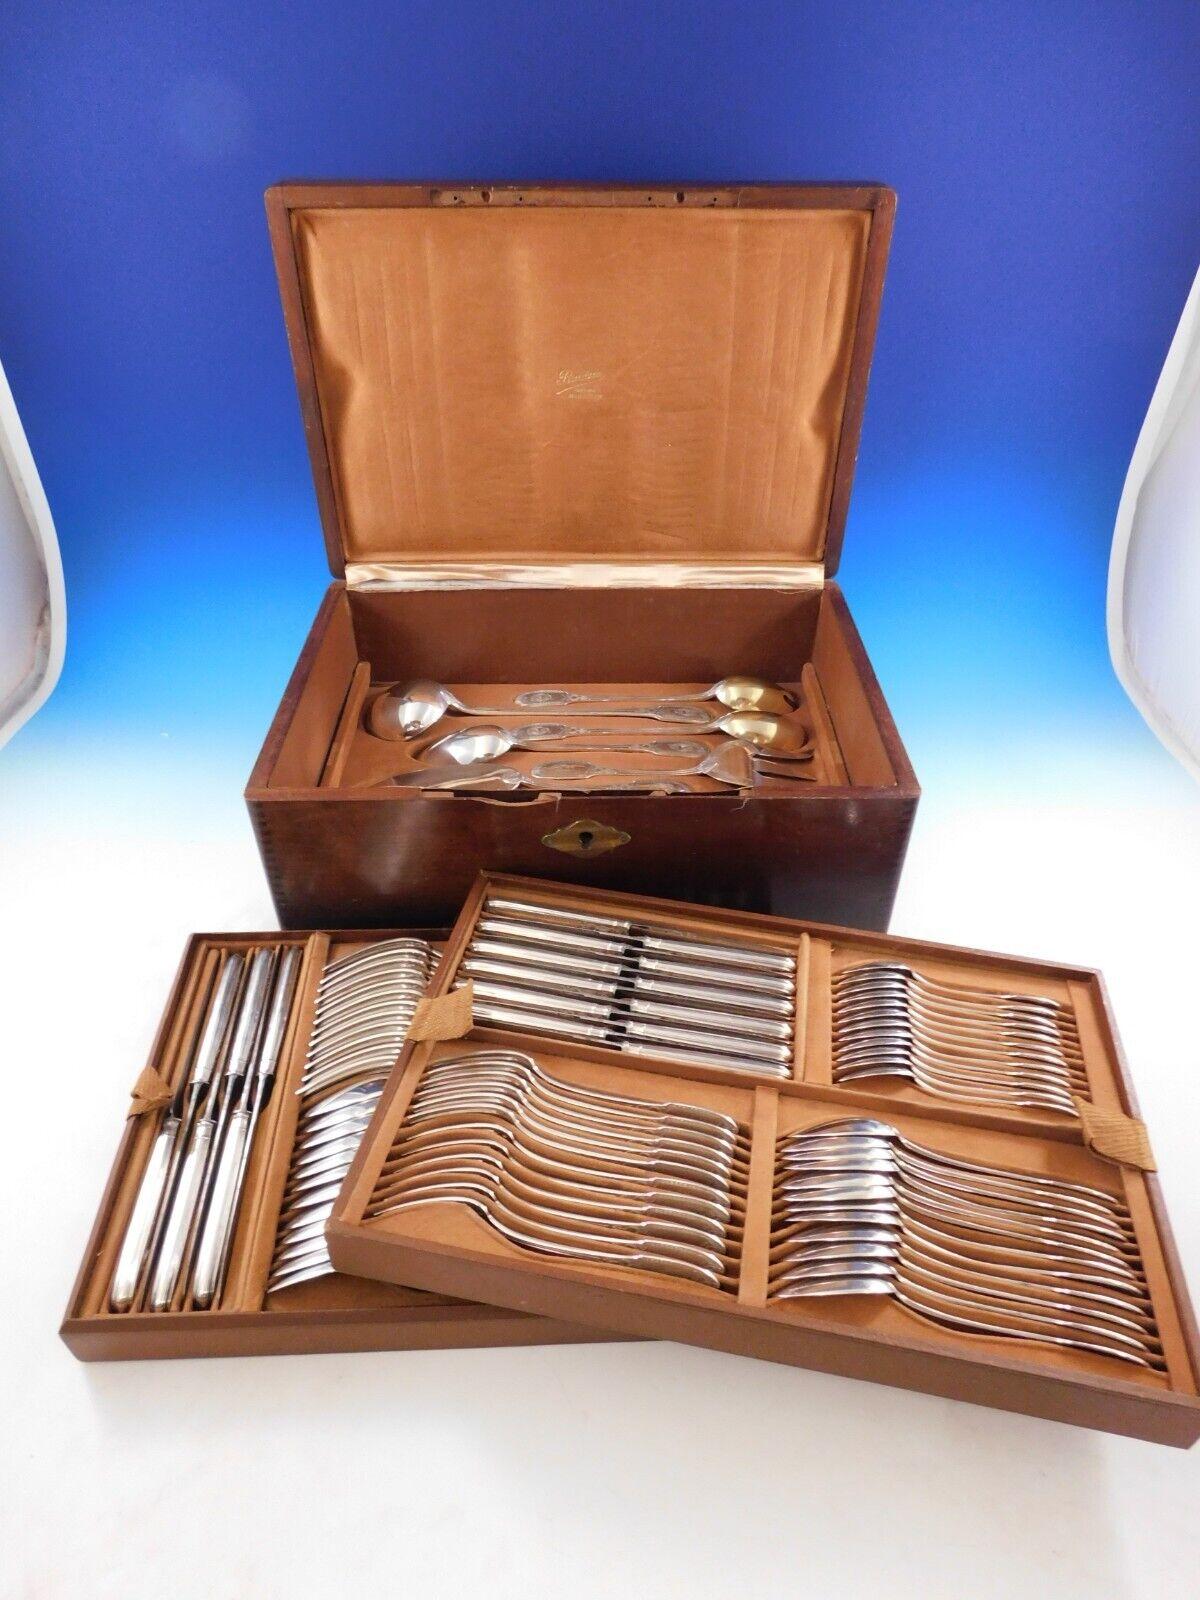 The Parisian silversmith Puiforcat is regarded as one of the legendary names in European silver craftsmanship. 
Superb Dinner Size Empire by Puiforcat sterling silver flatware set, 96 pieces. This rare pattern features an elegant swan motif. This